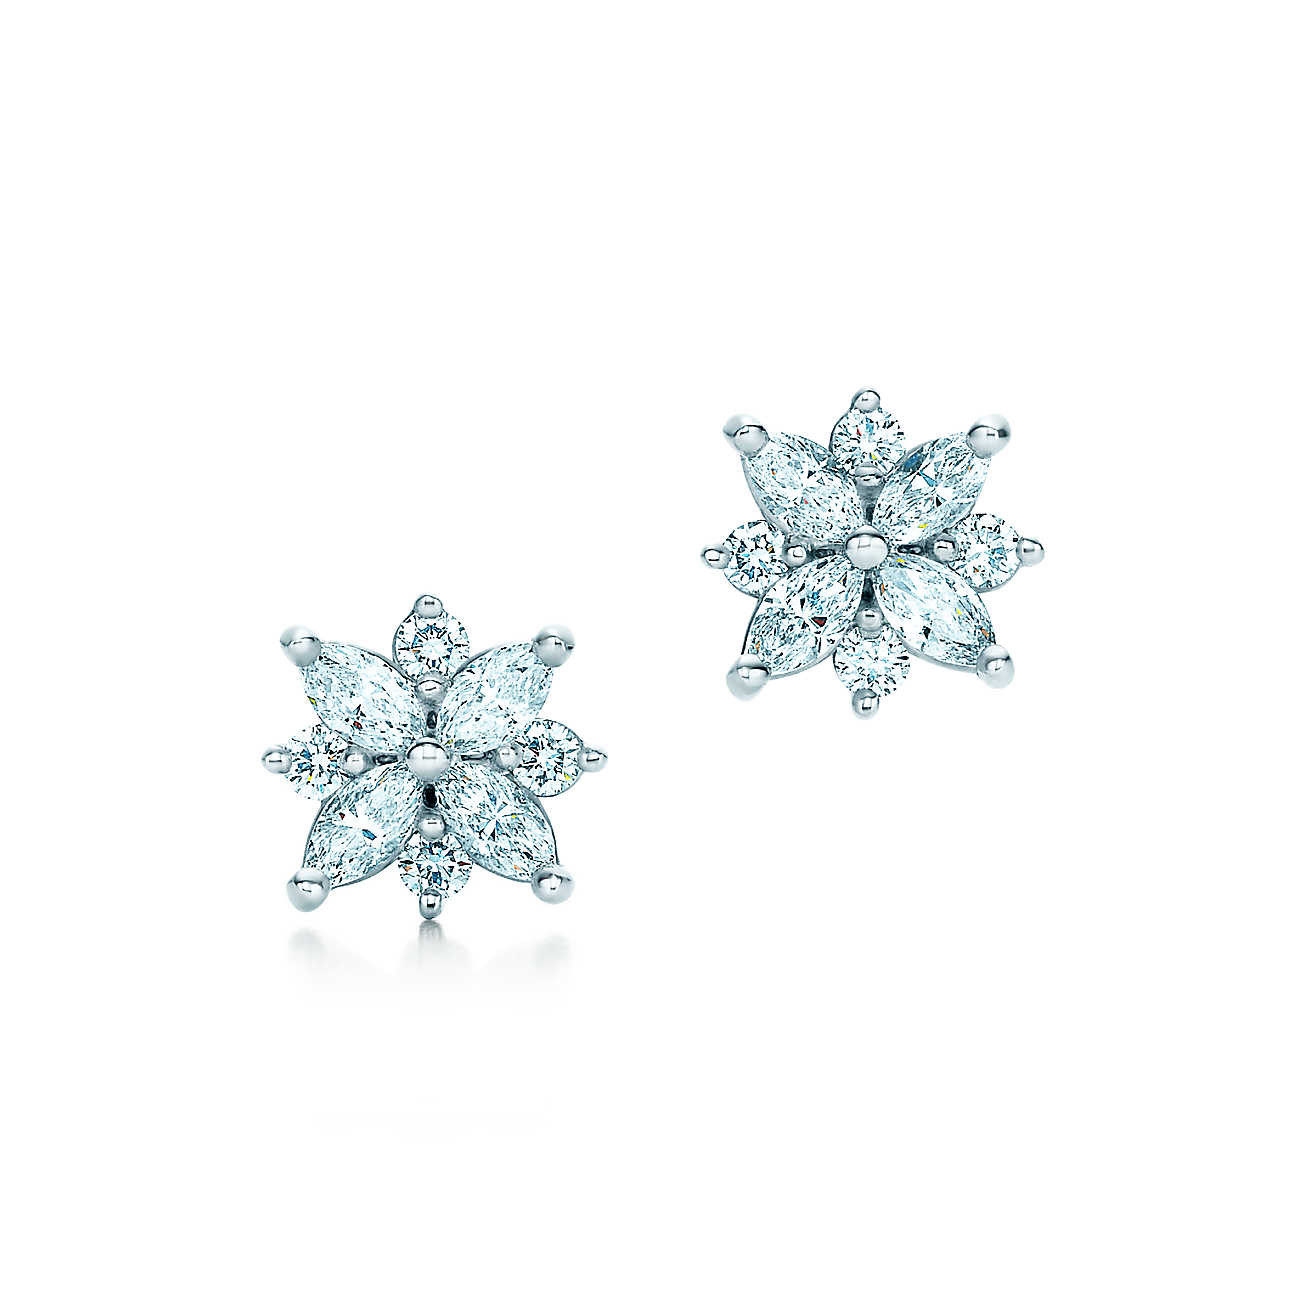 Tiffany Victoria Earrings
 Tiffany Victoria cluster earrings in platinum with